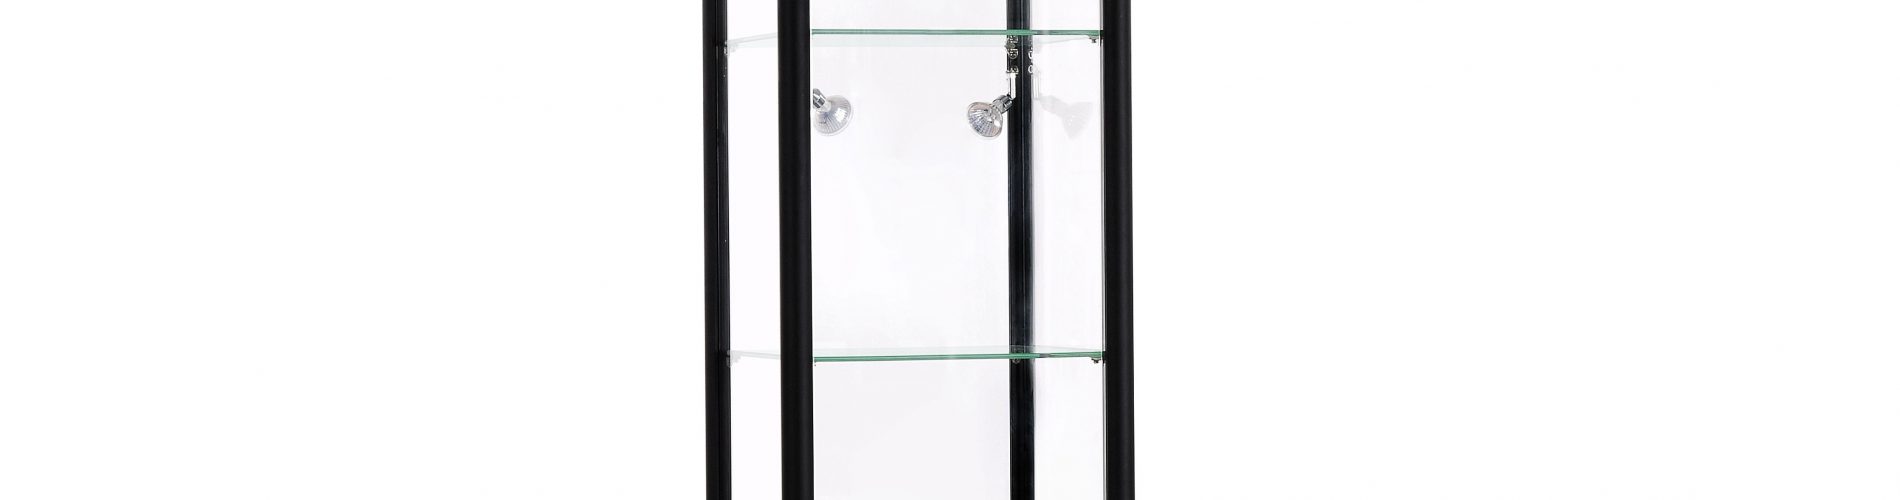 Square Display Cabinets